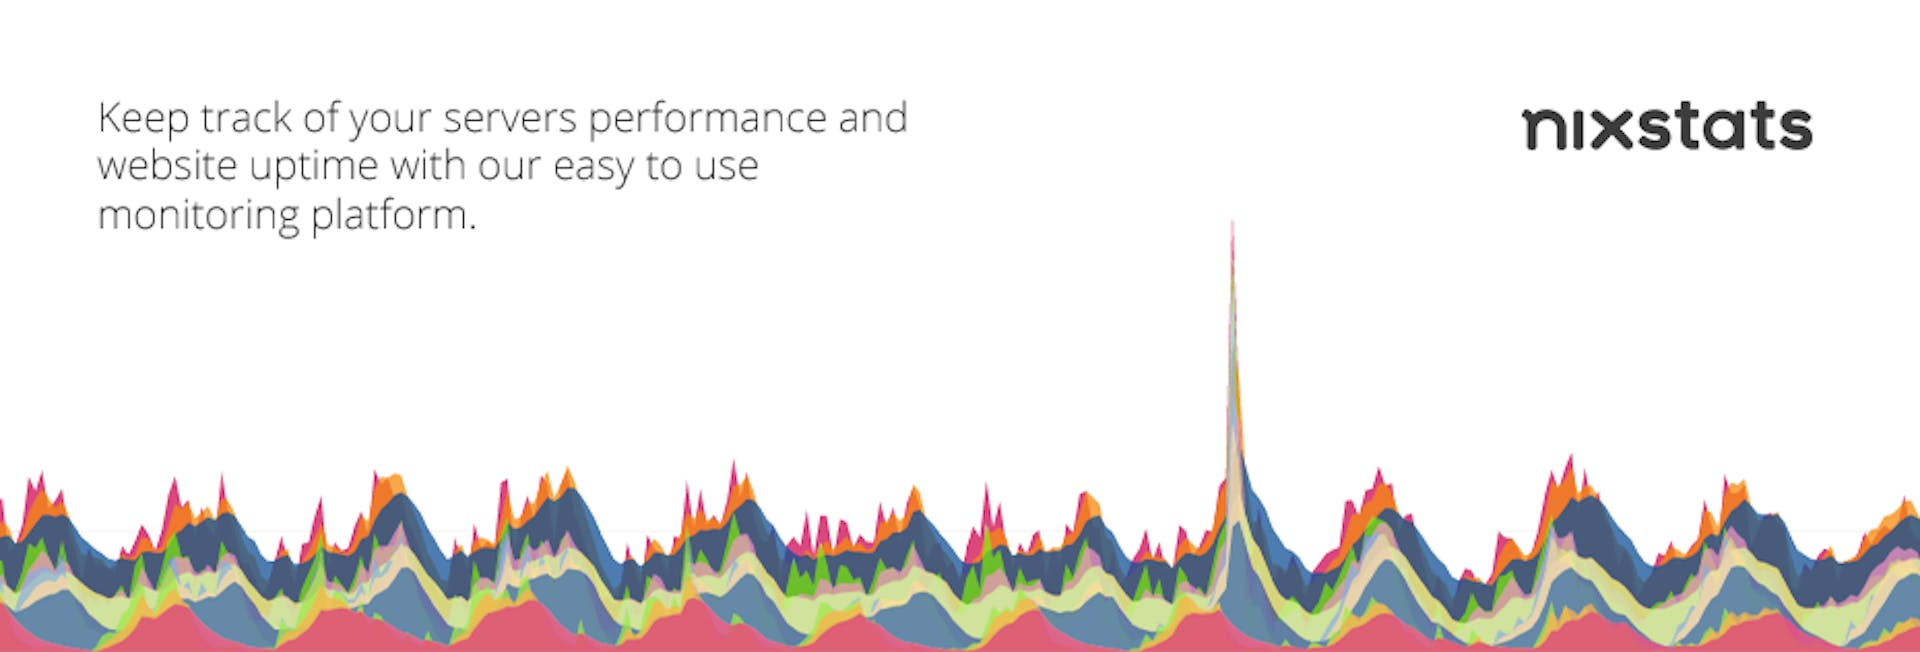 featured image - Keep track of your servers performance and website uptime with ease